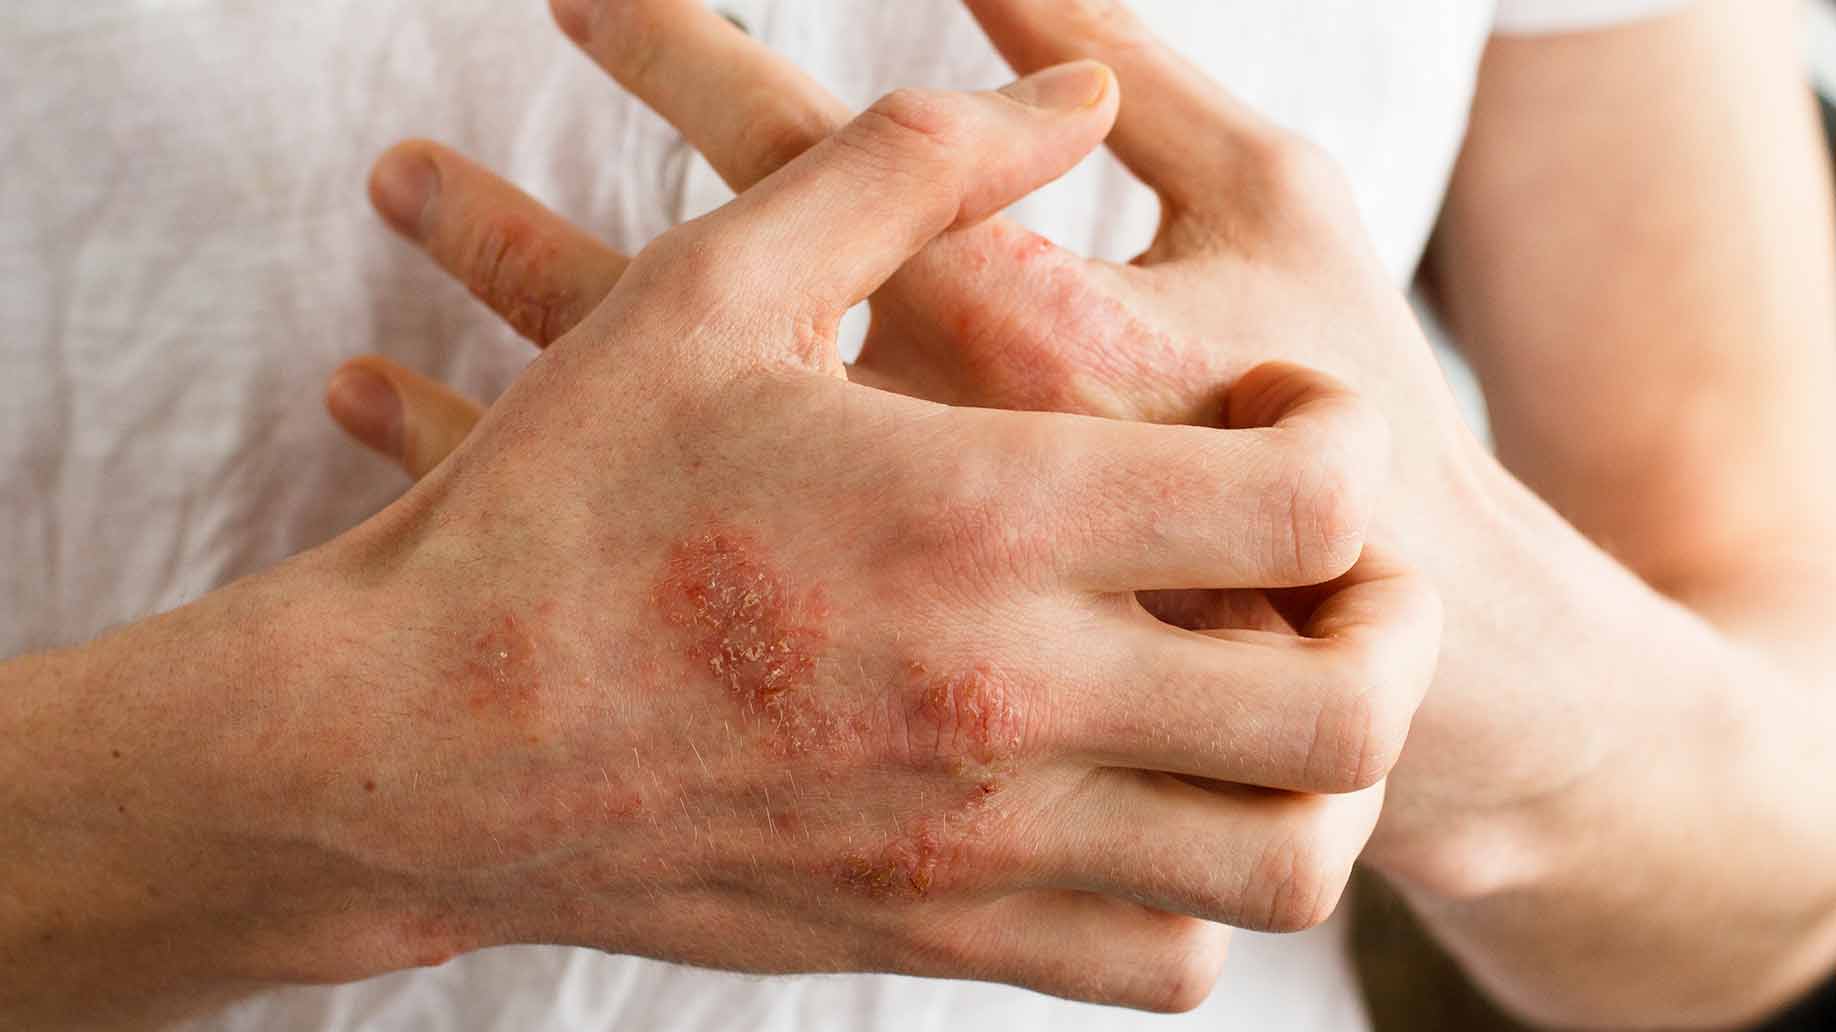 Eczema And The Control Of This Skin Condition